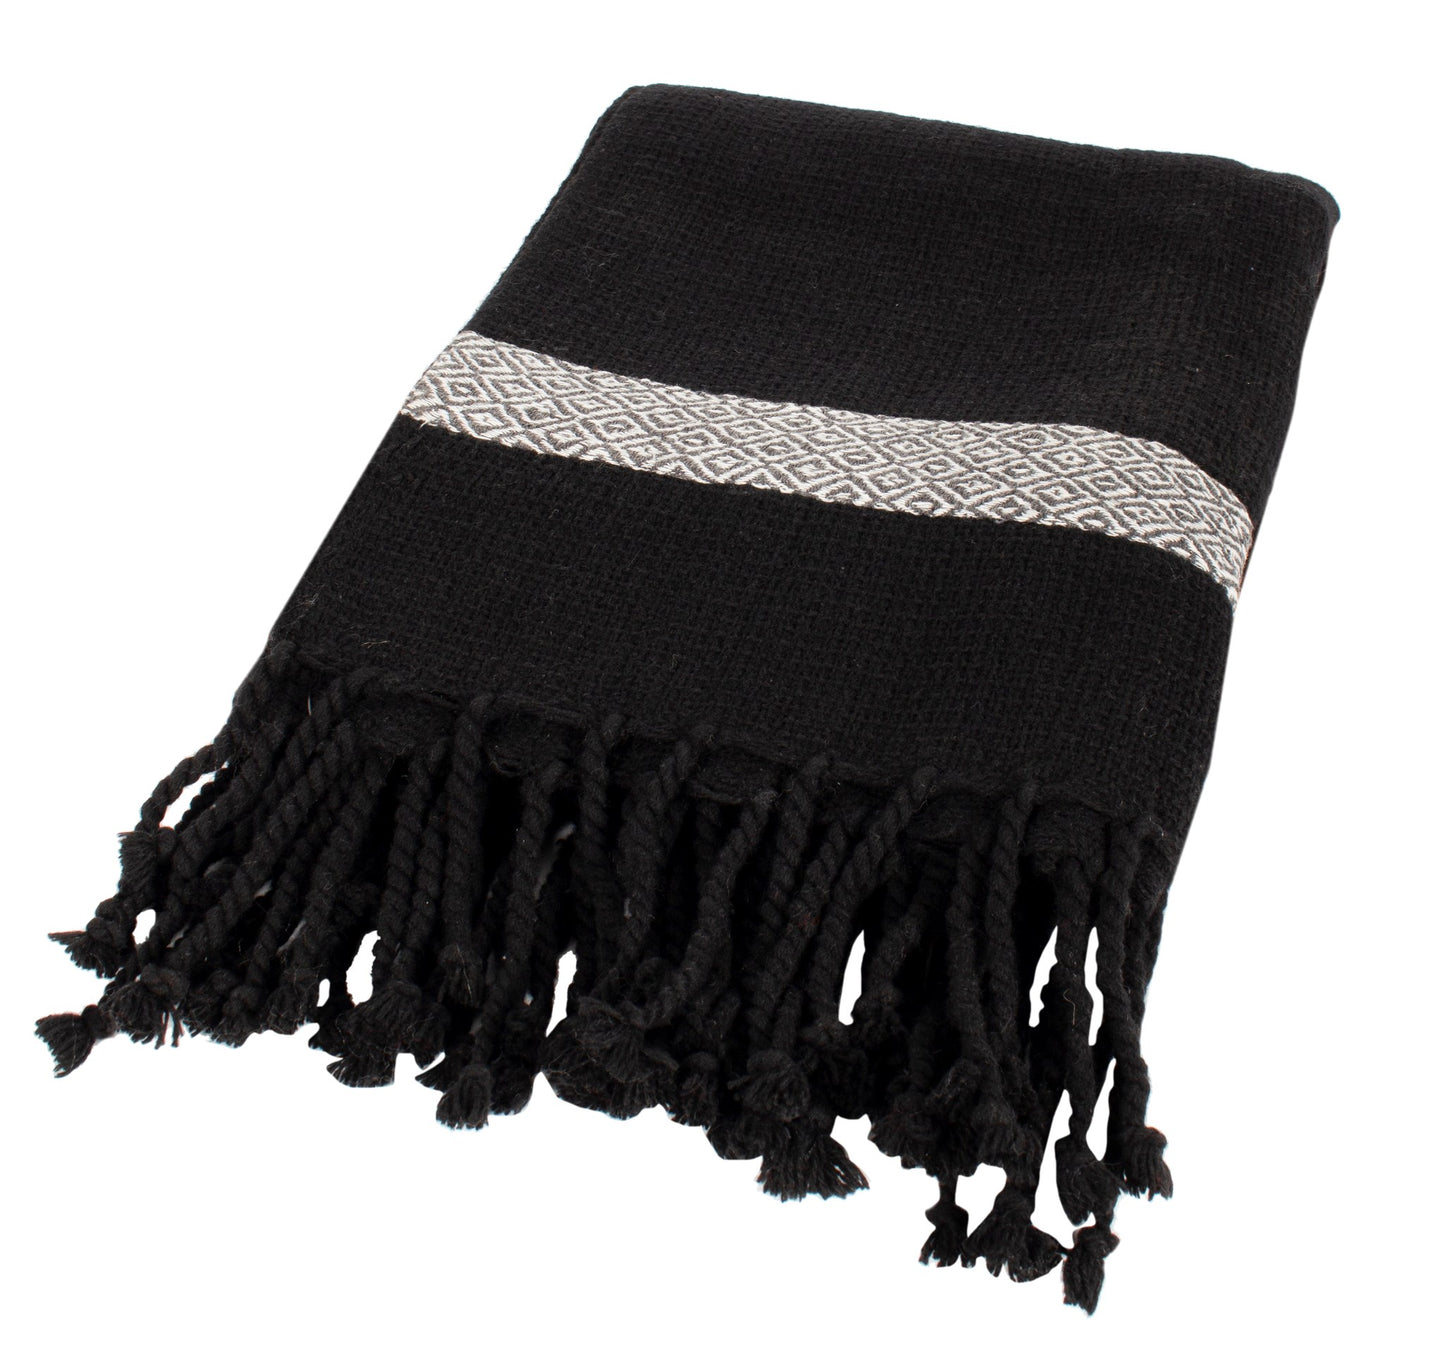 Black Knit Throw with Diamond Pattern Accent